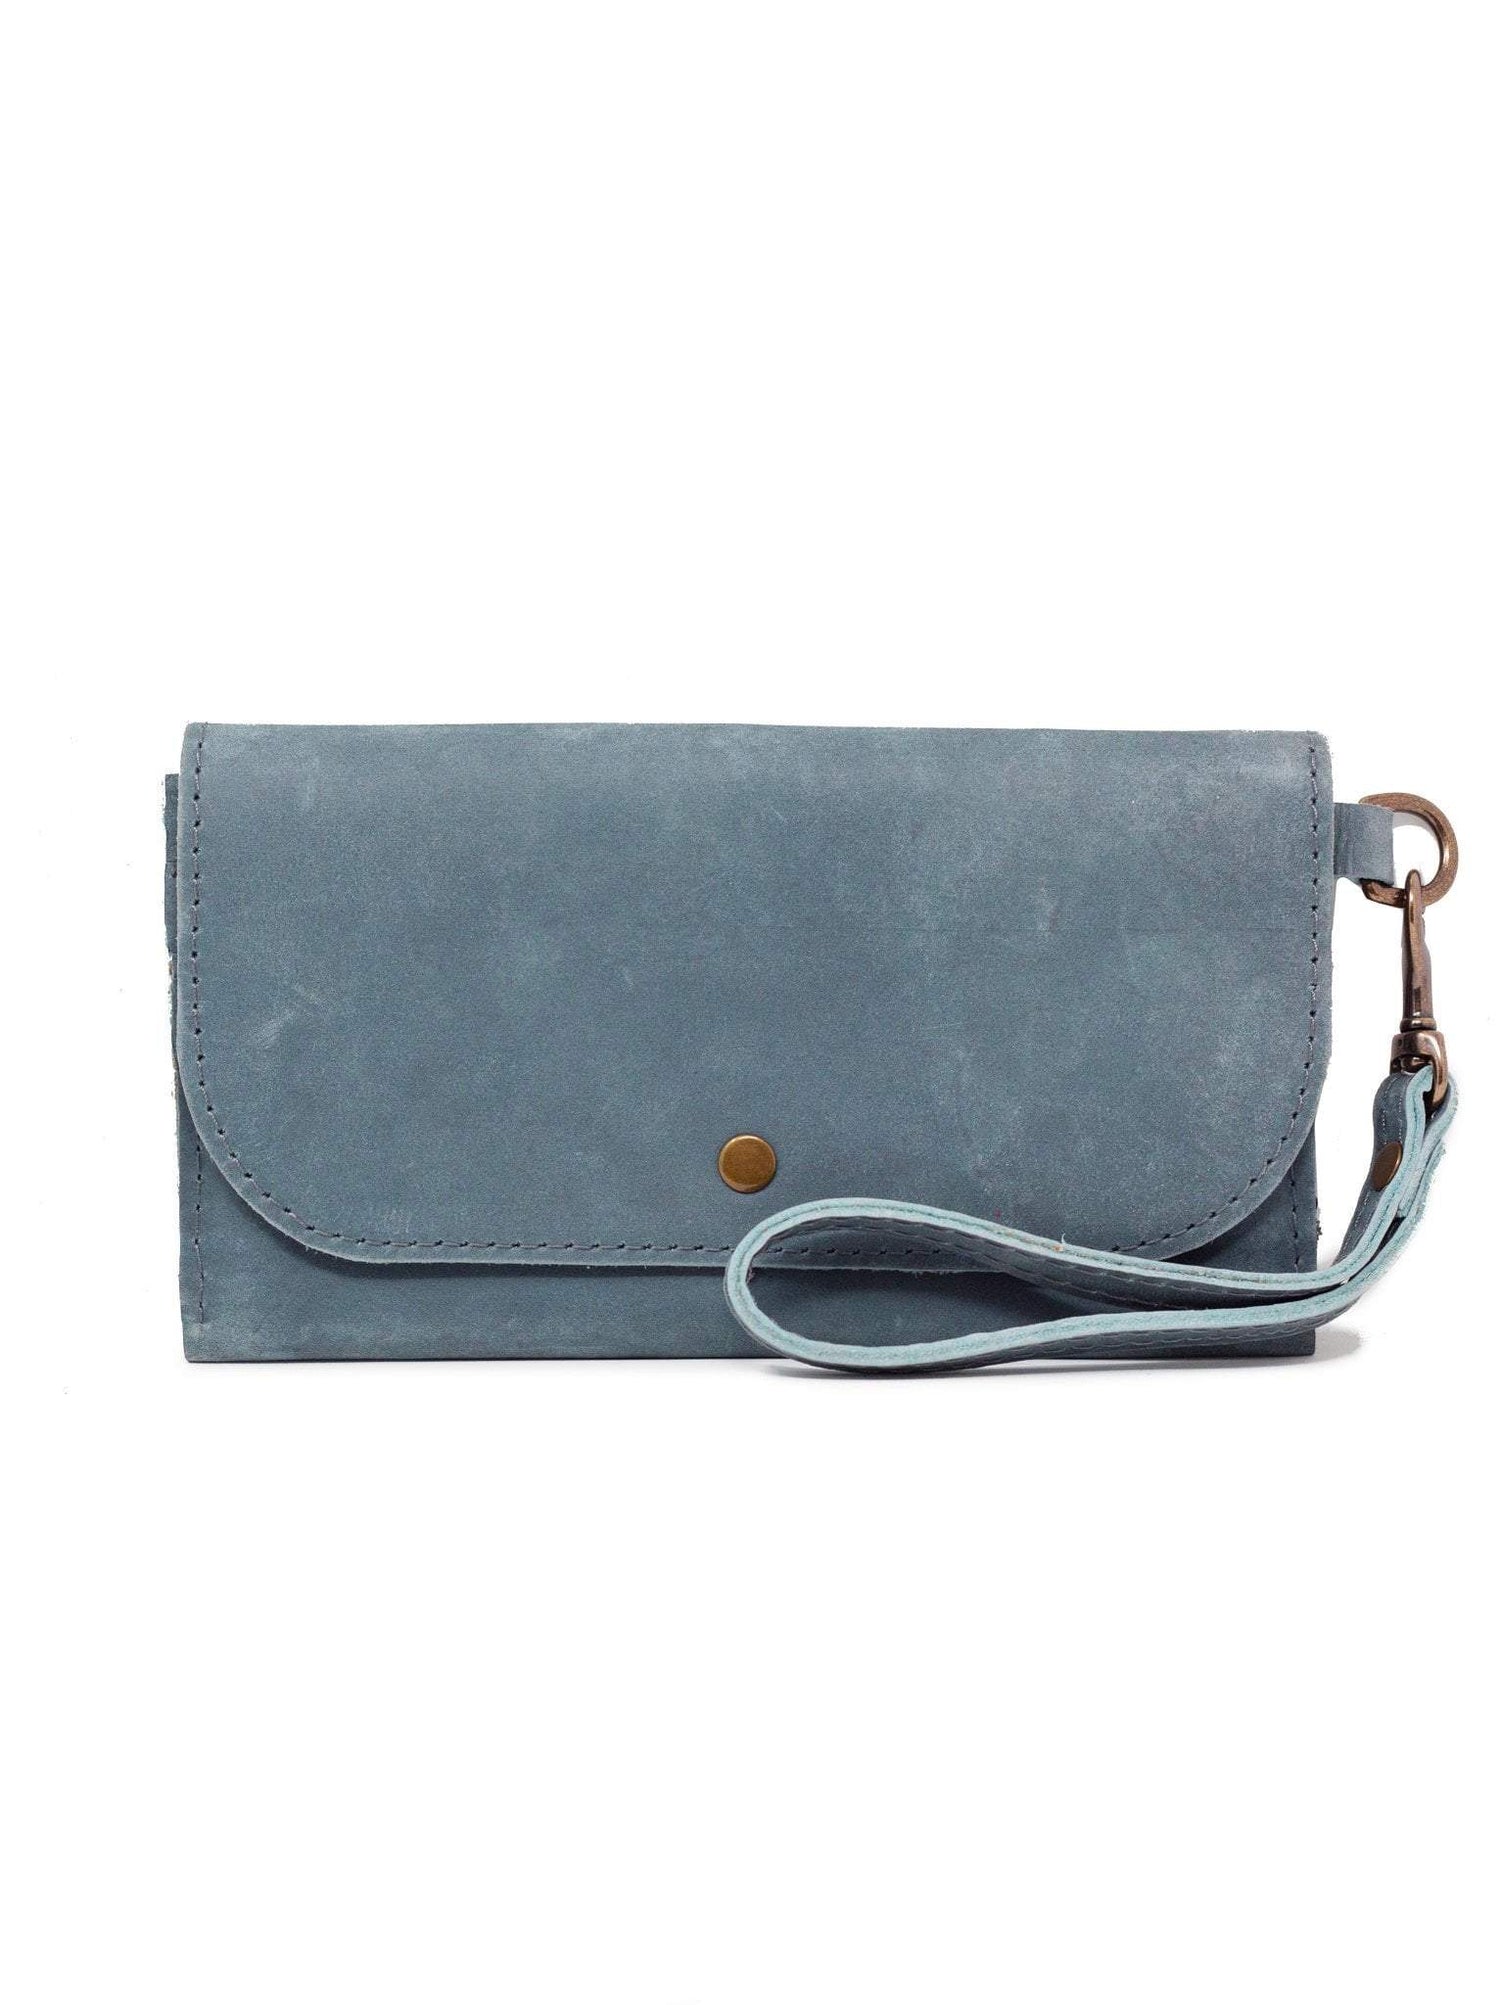 Able Mare Phone Wallet Wallets in Denim Blue at Wrapsody